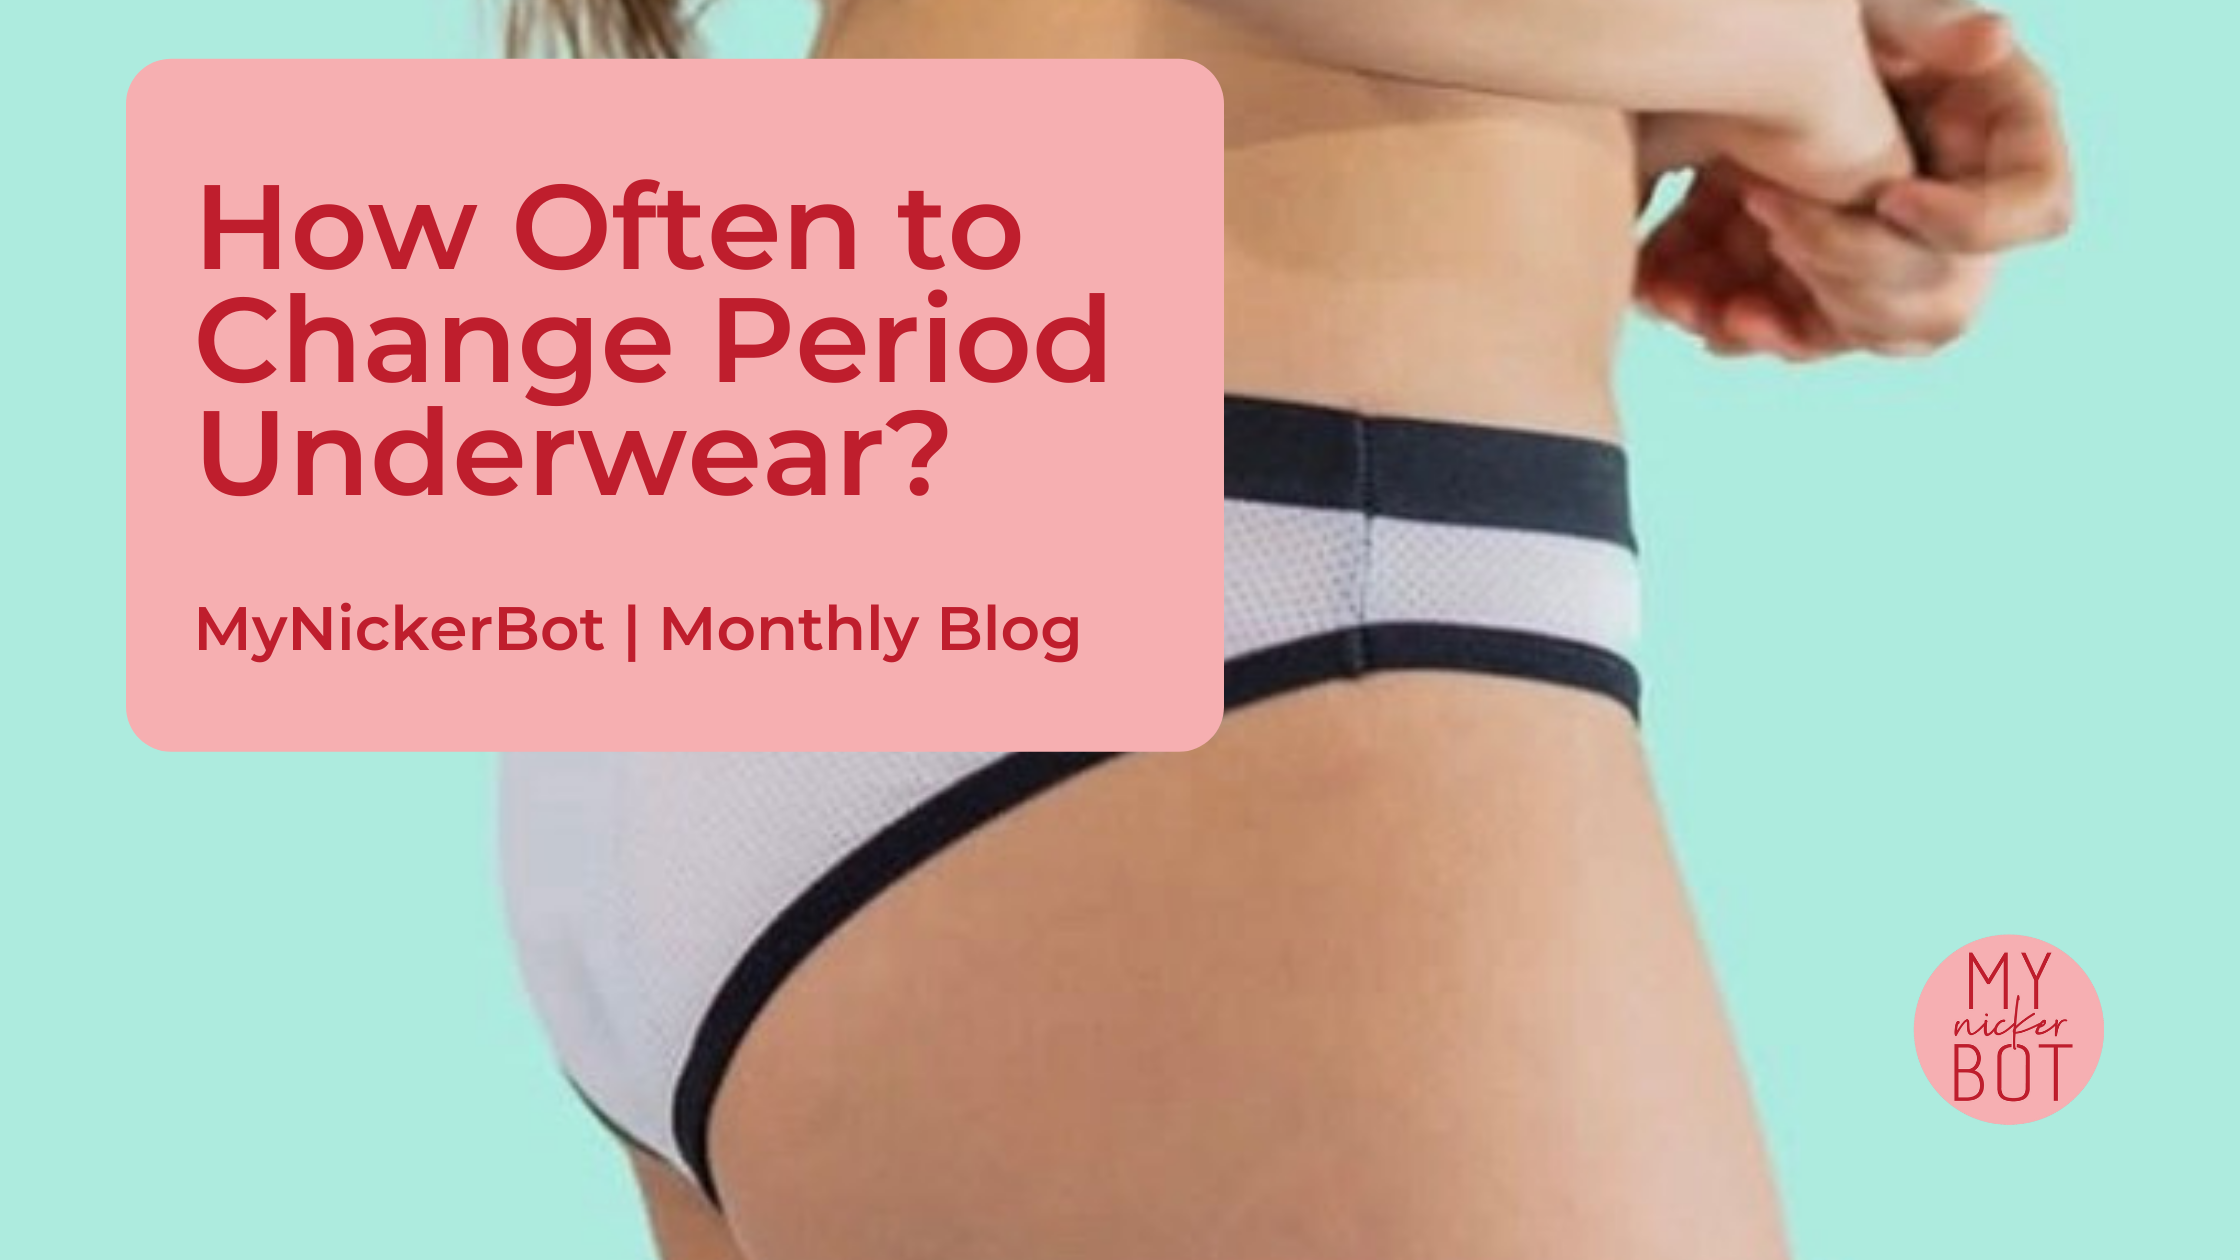 4 Ways to Remove Blood from Your Underwear After Your Period